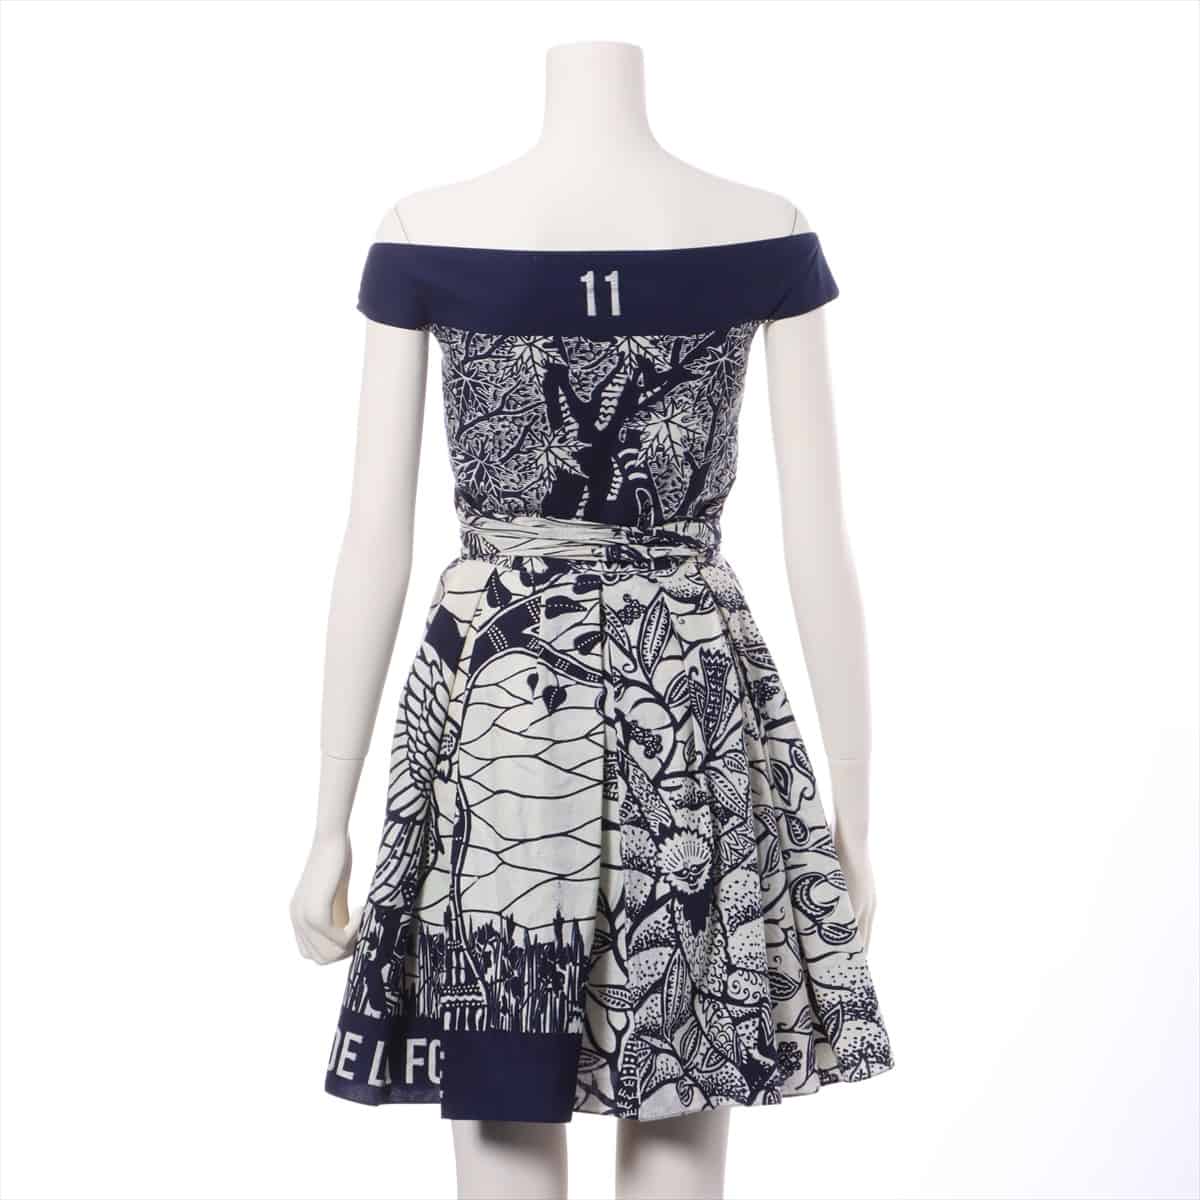 Christian Dior Cotton Dress F 34 Ladies' Navy blue  There are spots on the armpits